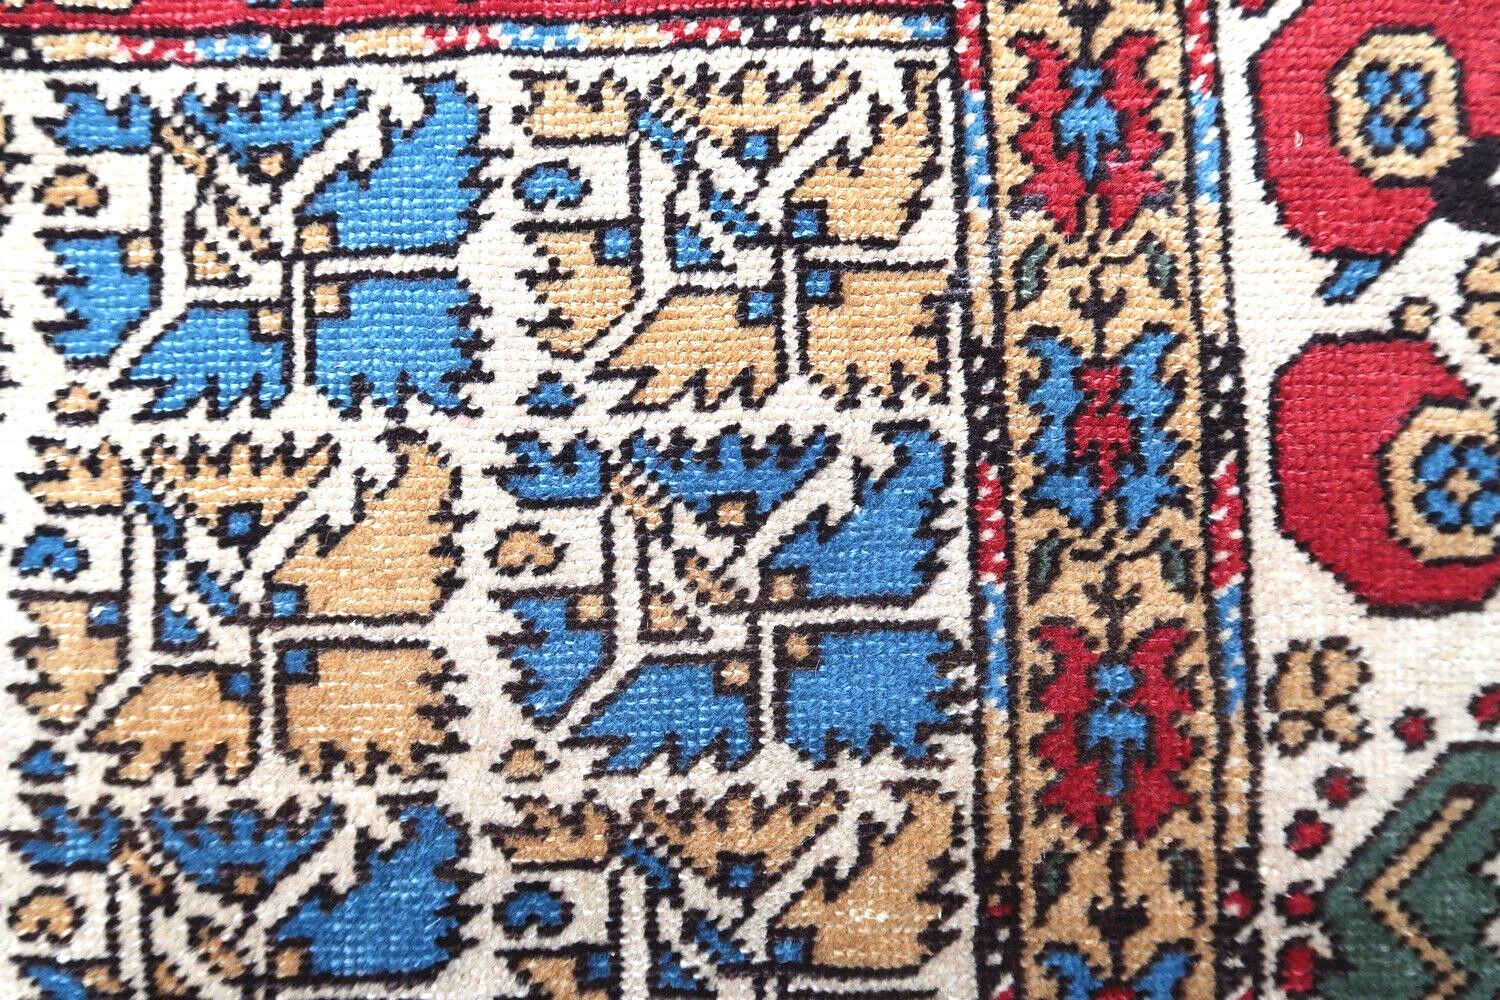 Handmade antique Turkish Transylvania prayer rug in bright natural dyes. The rug is from the end of 19th century in original good condition.